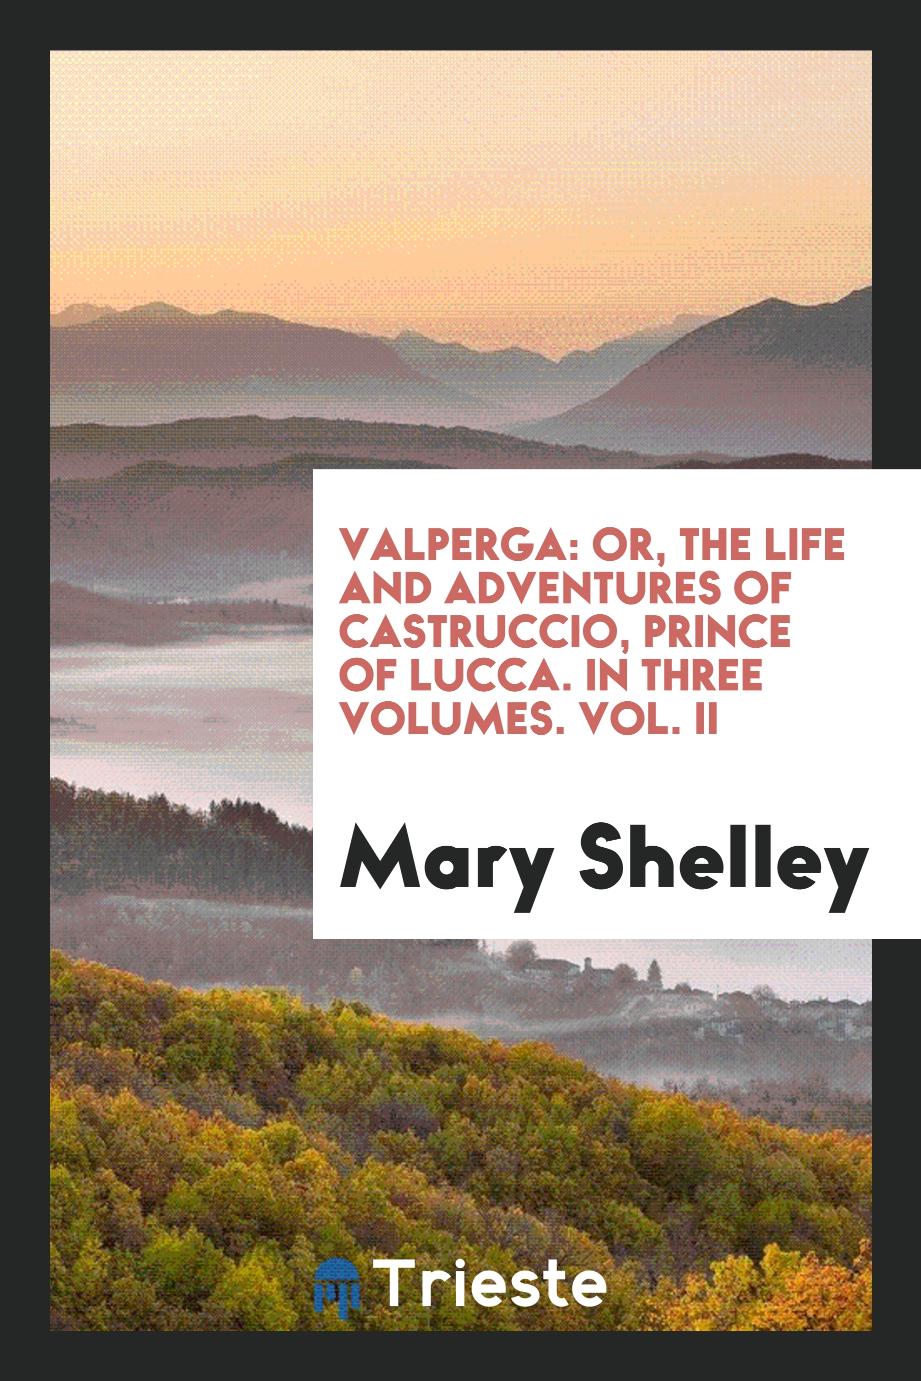 Valperga: Or, The Life and Adventures of Castruccio, Prince of Lucca. In Three Volumes. Vol. II